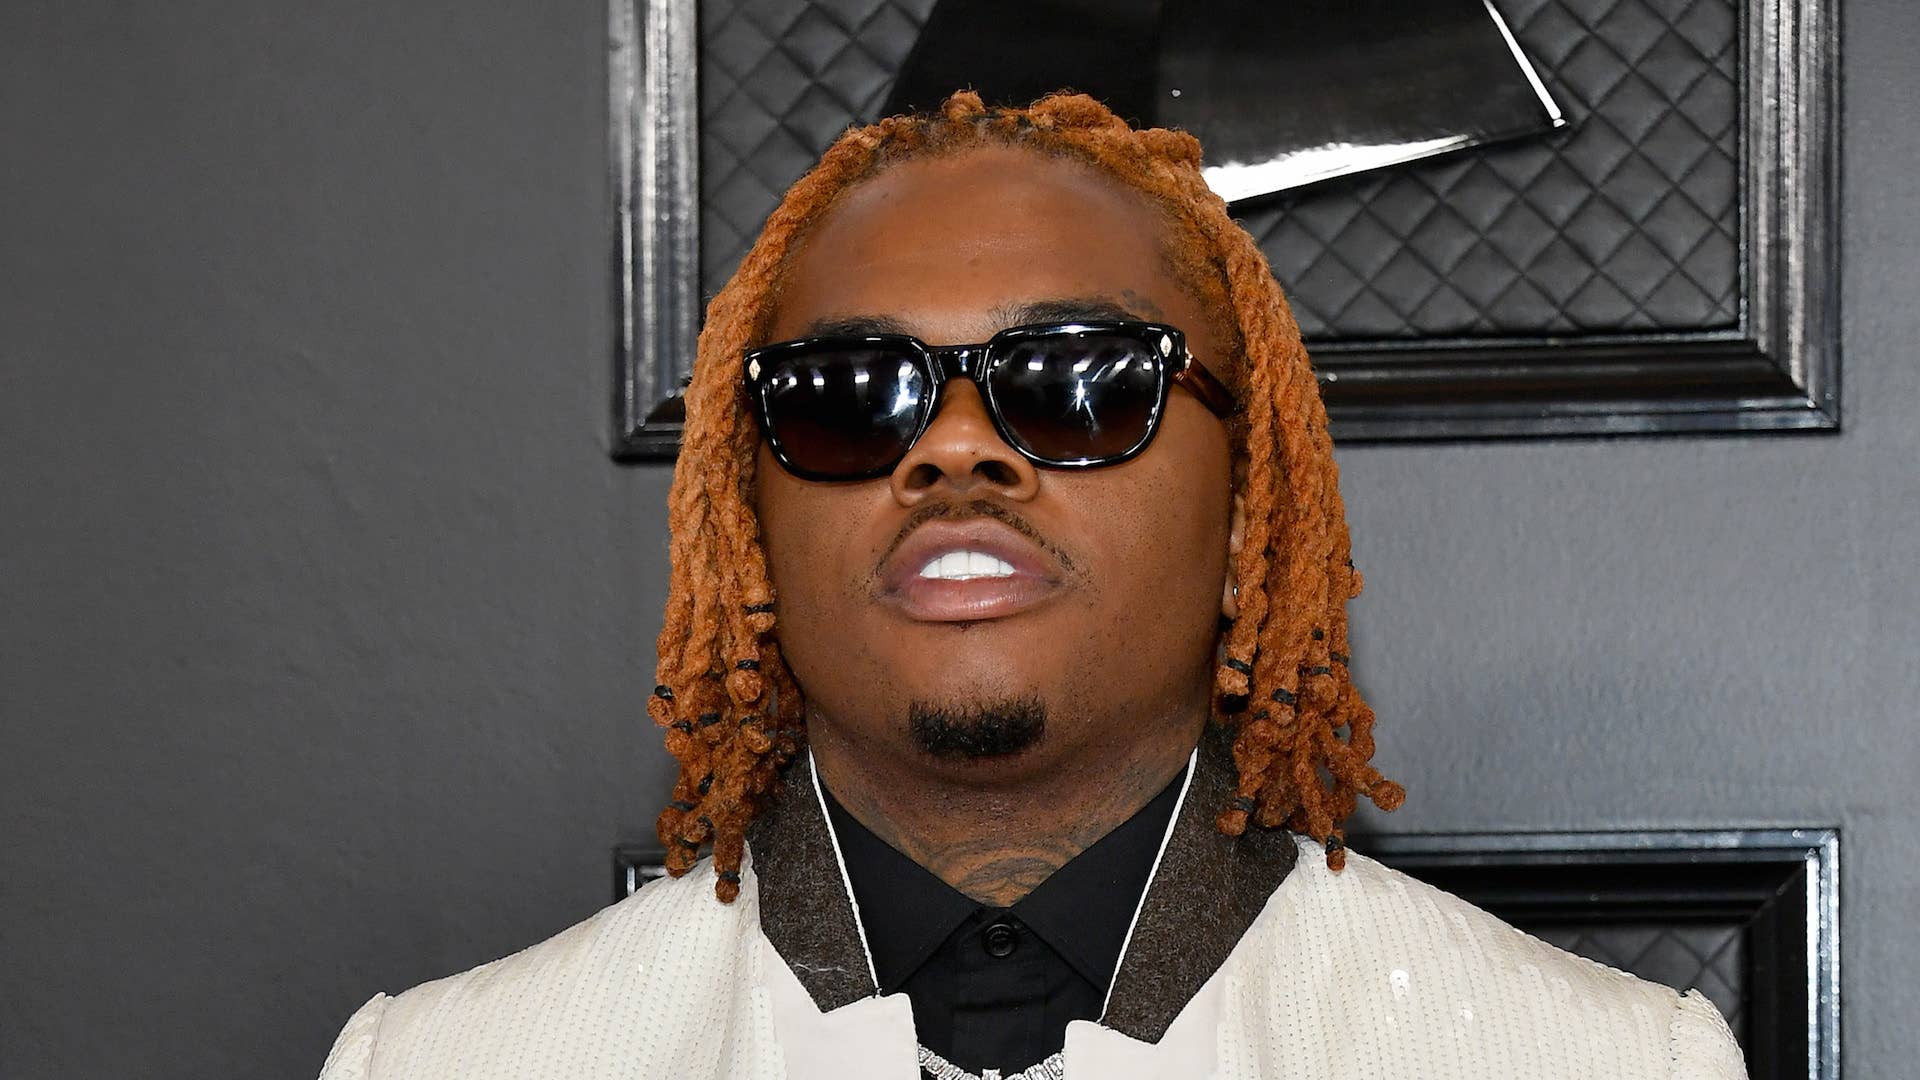 Gunna attends the 62nd Annual GRAMMY Awards at Staples Center